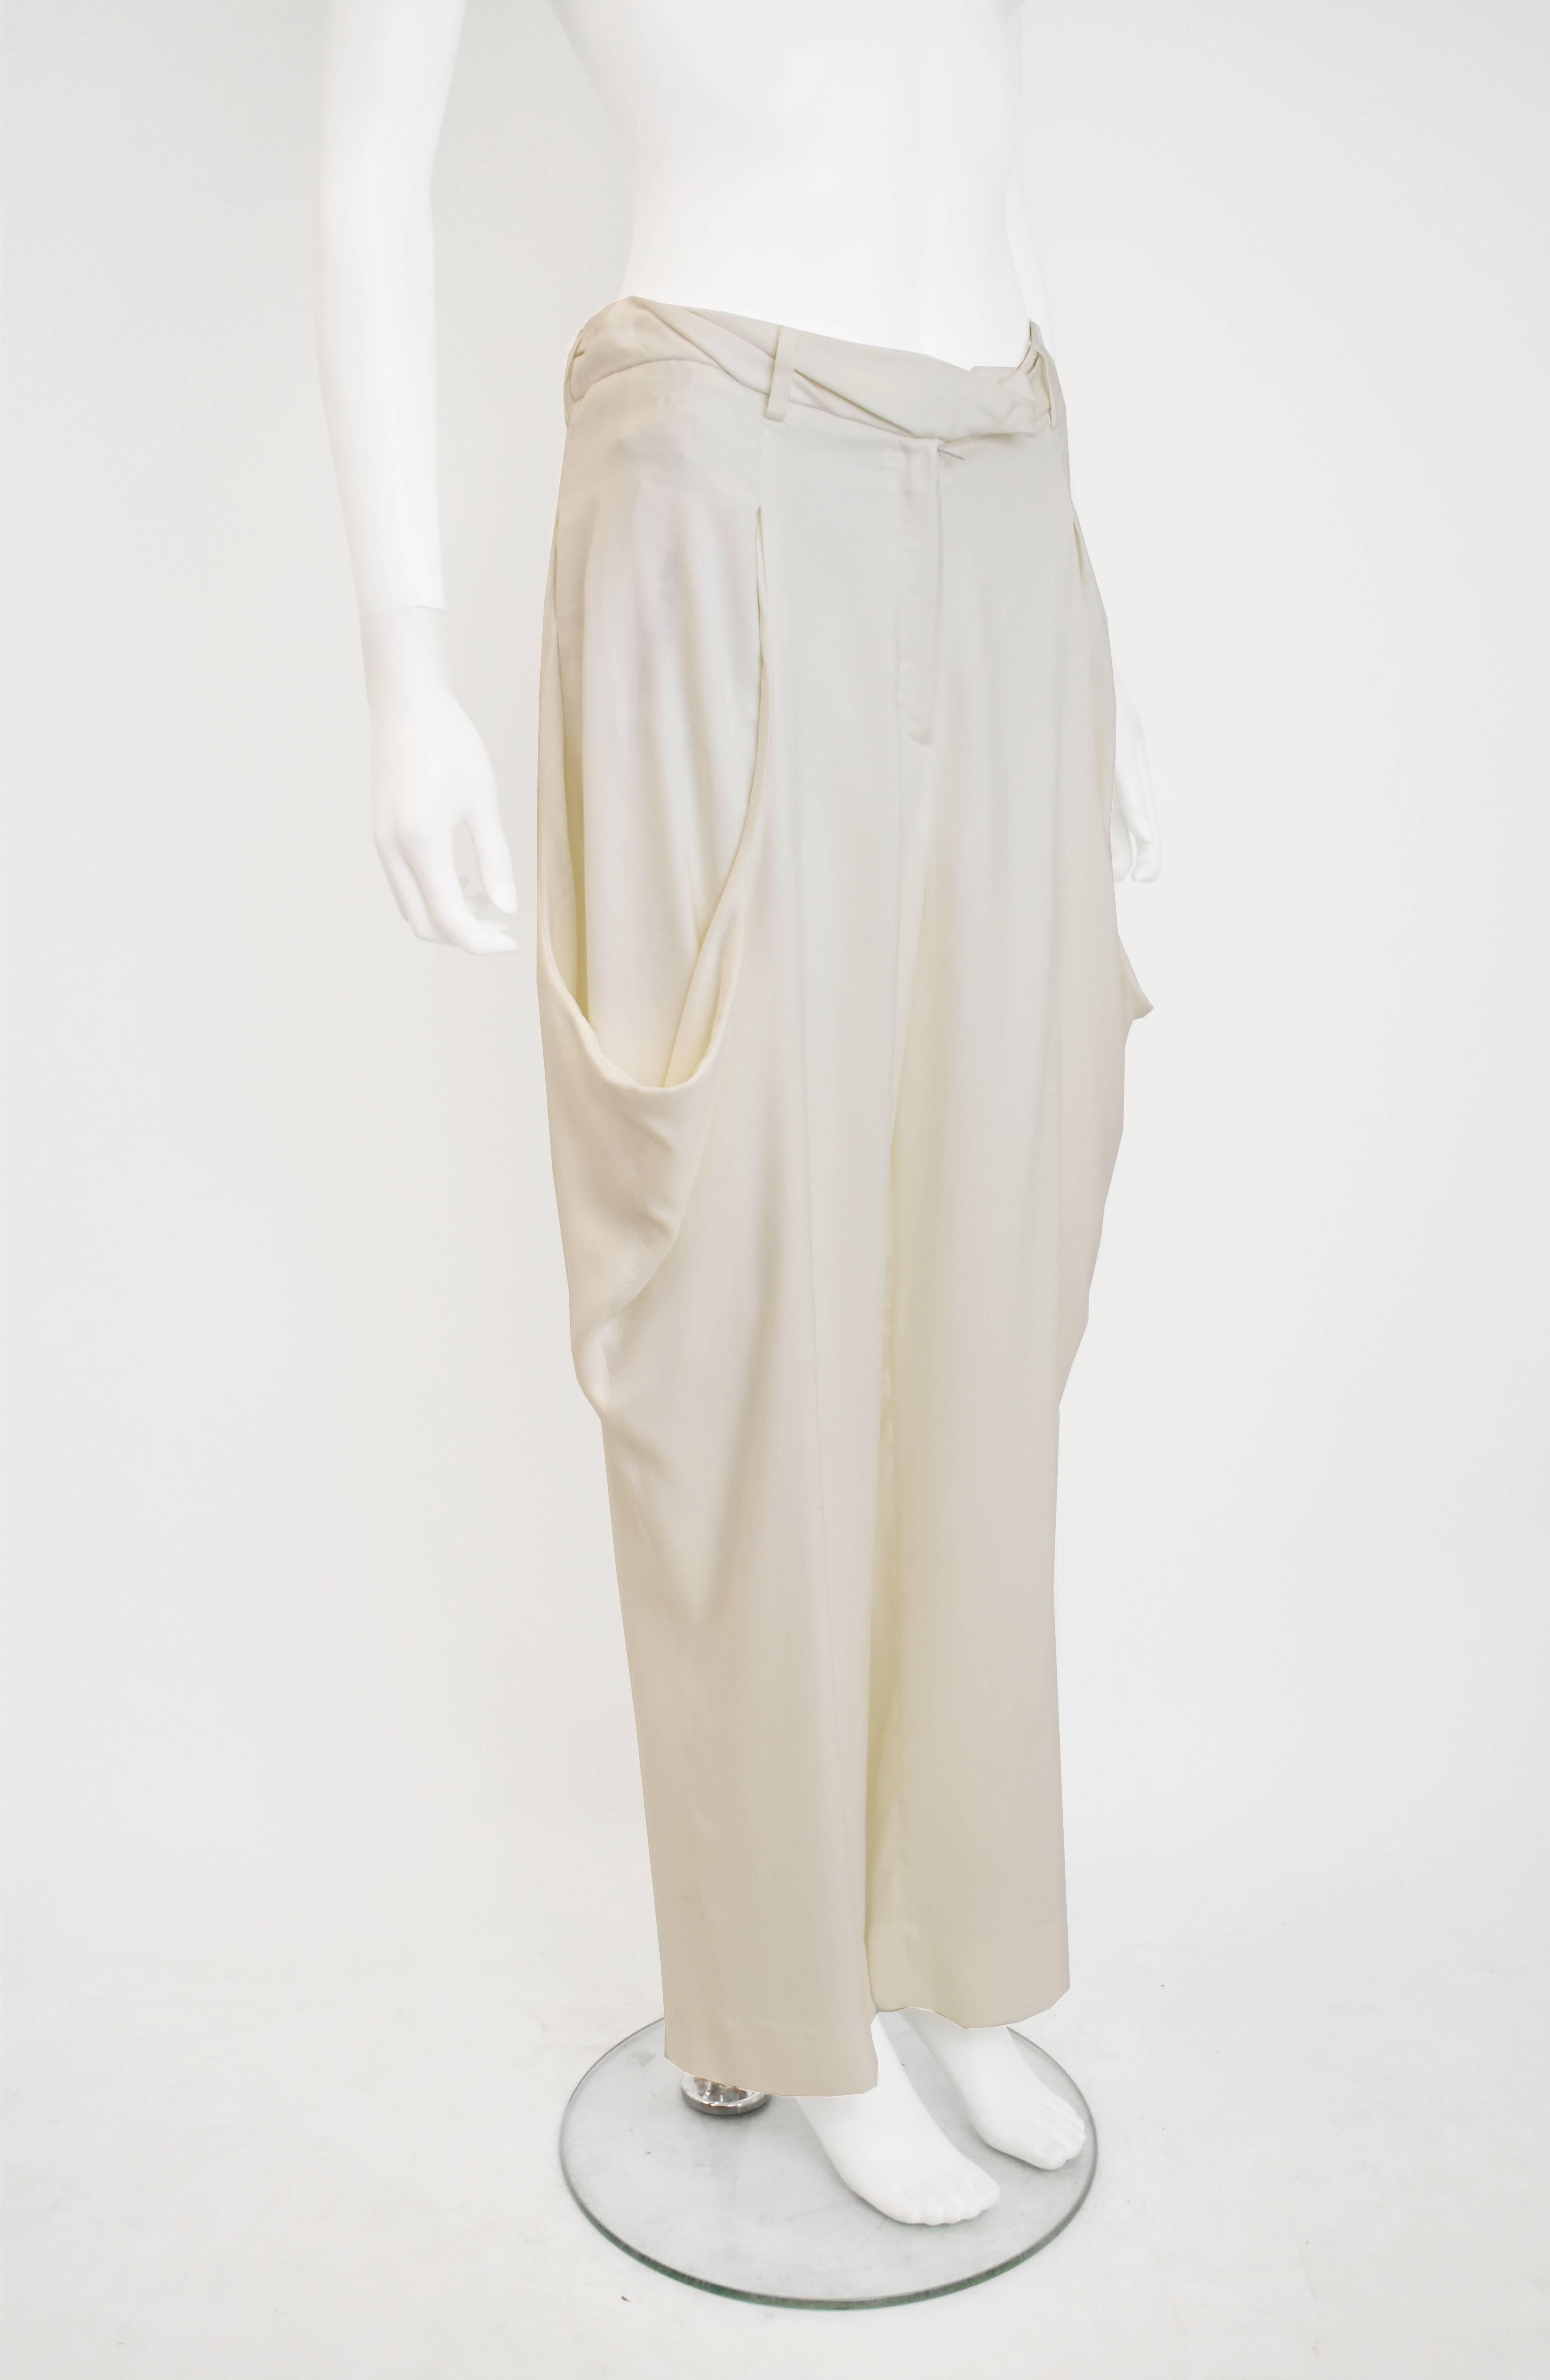 A pair of elegant white cropped trousers by Maison Martin Margiela. The trousers have an interesting shape with a quite wide, cropped cut and oversize pockets on the side that create an extended silhouette. The trousers also have the iconic white